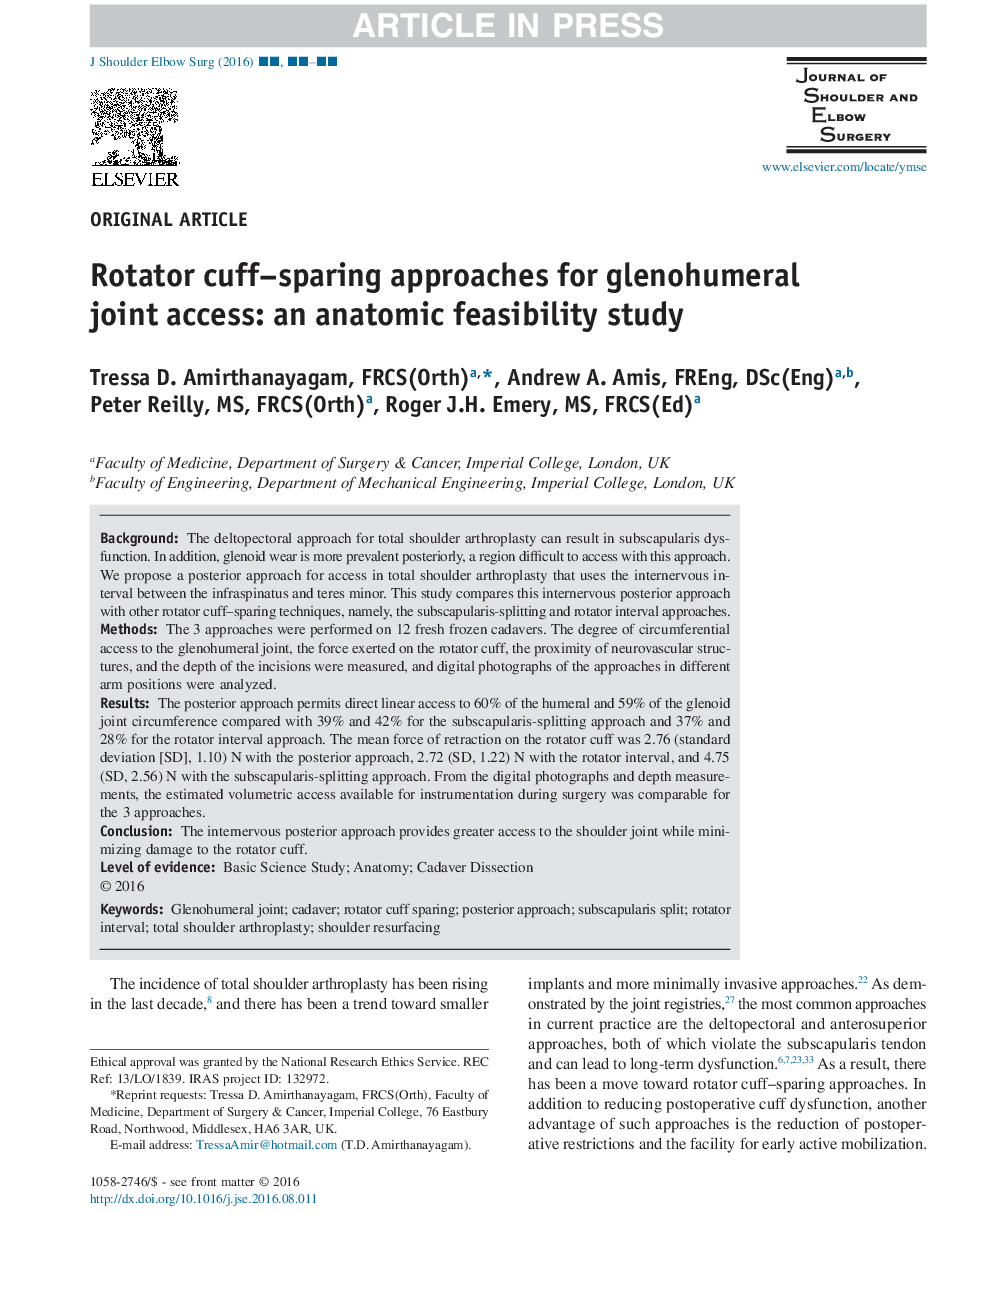 Rotator cuff-sparing approaches for glenohumeral joint access: an anatomic feasibility study